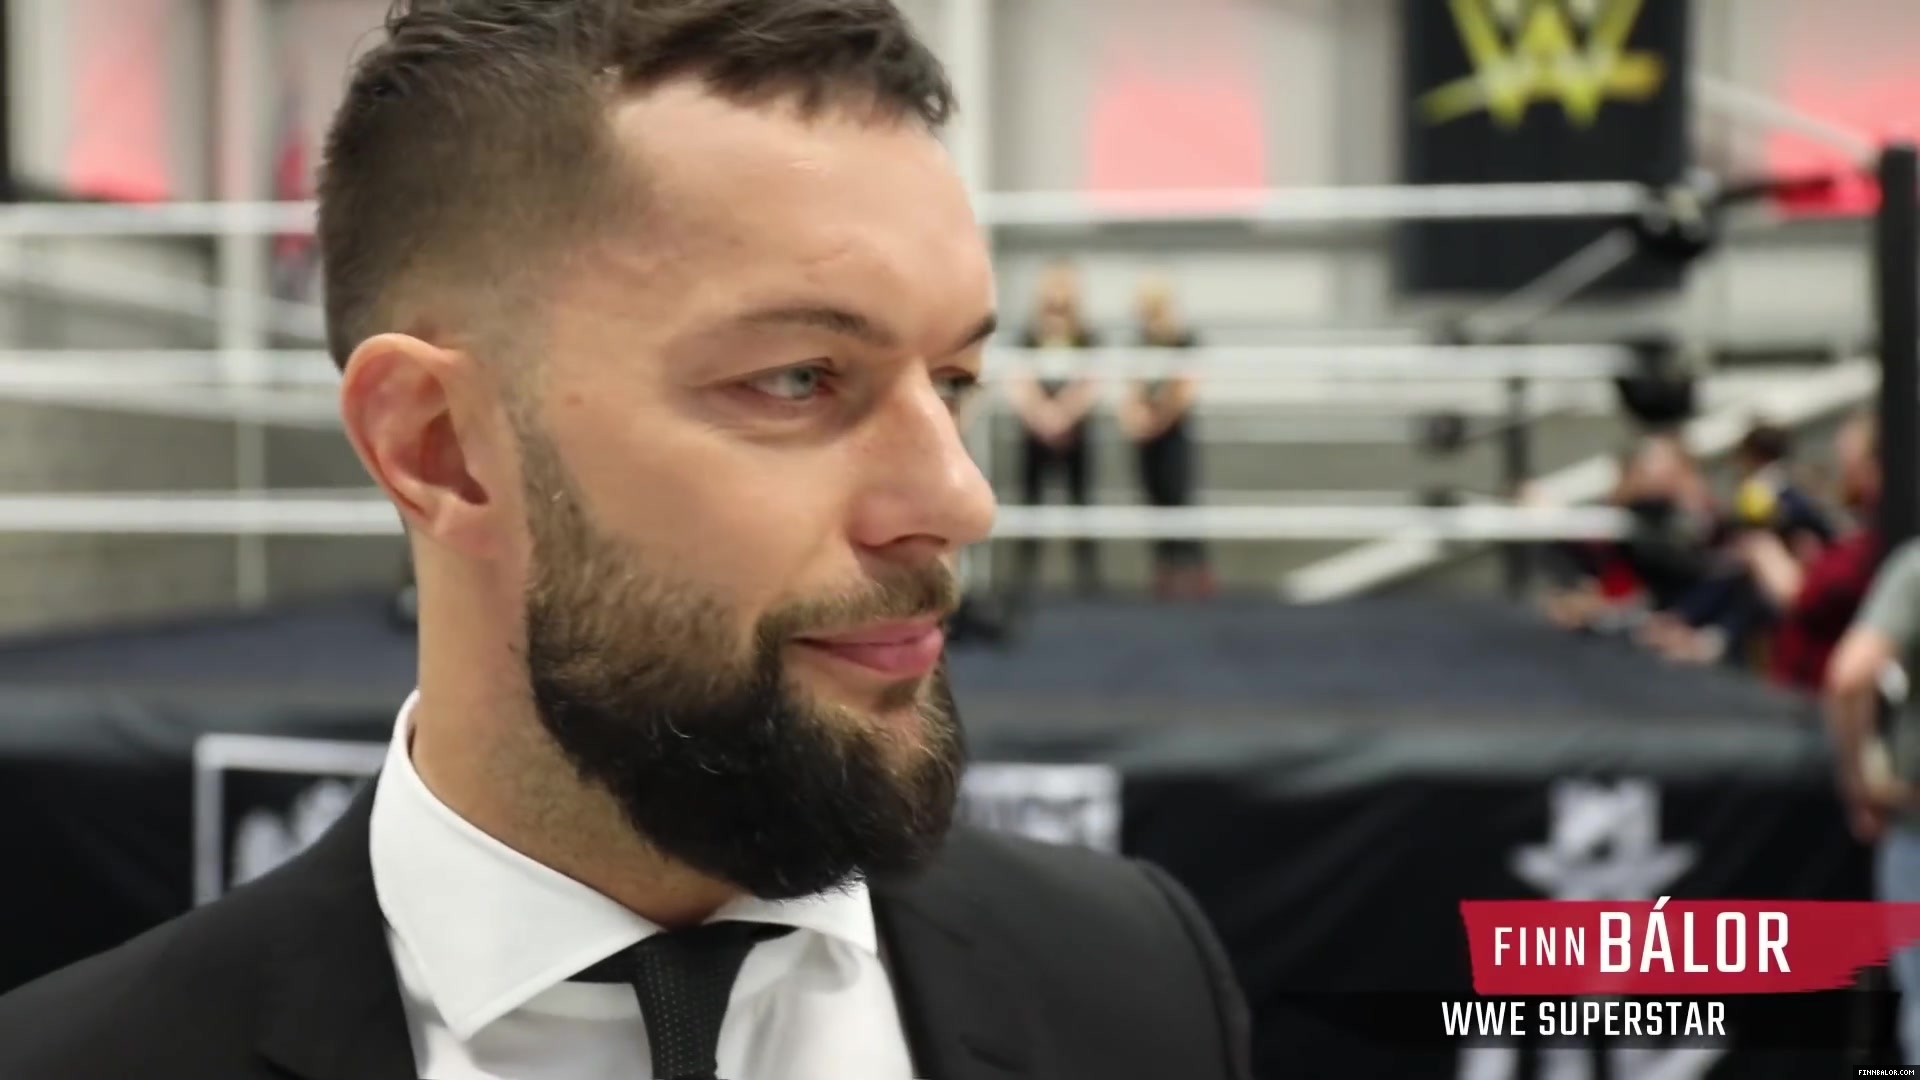 WWE_Superstar_FINN_BALOR_joins_MOUSTACHE_MOUNTAIN_at_the_opening_of_the_NXT_UK_PC_047.jpg